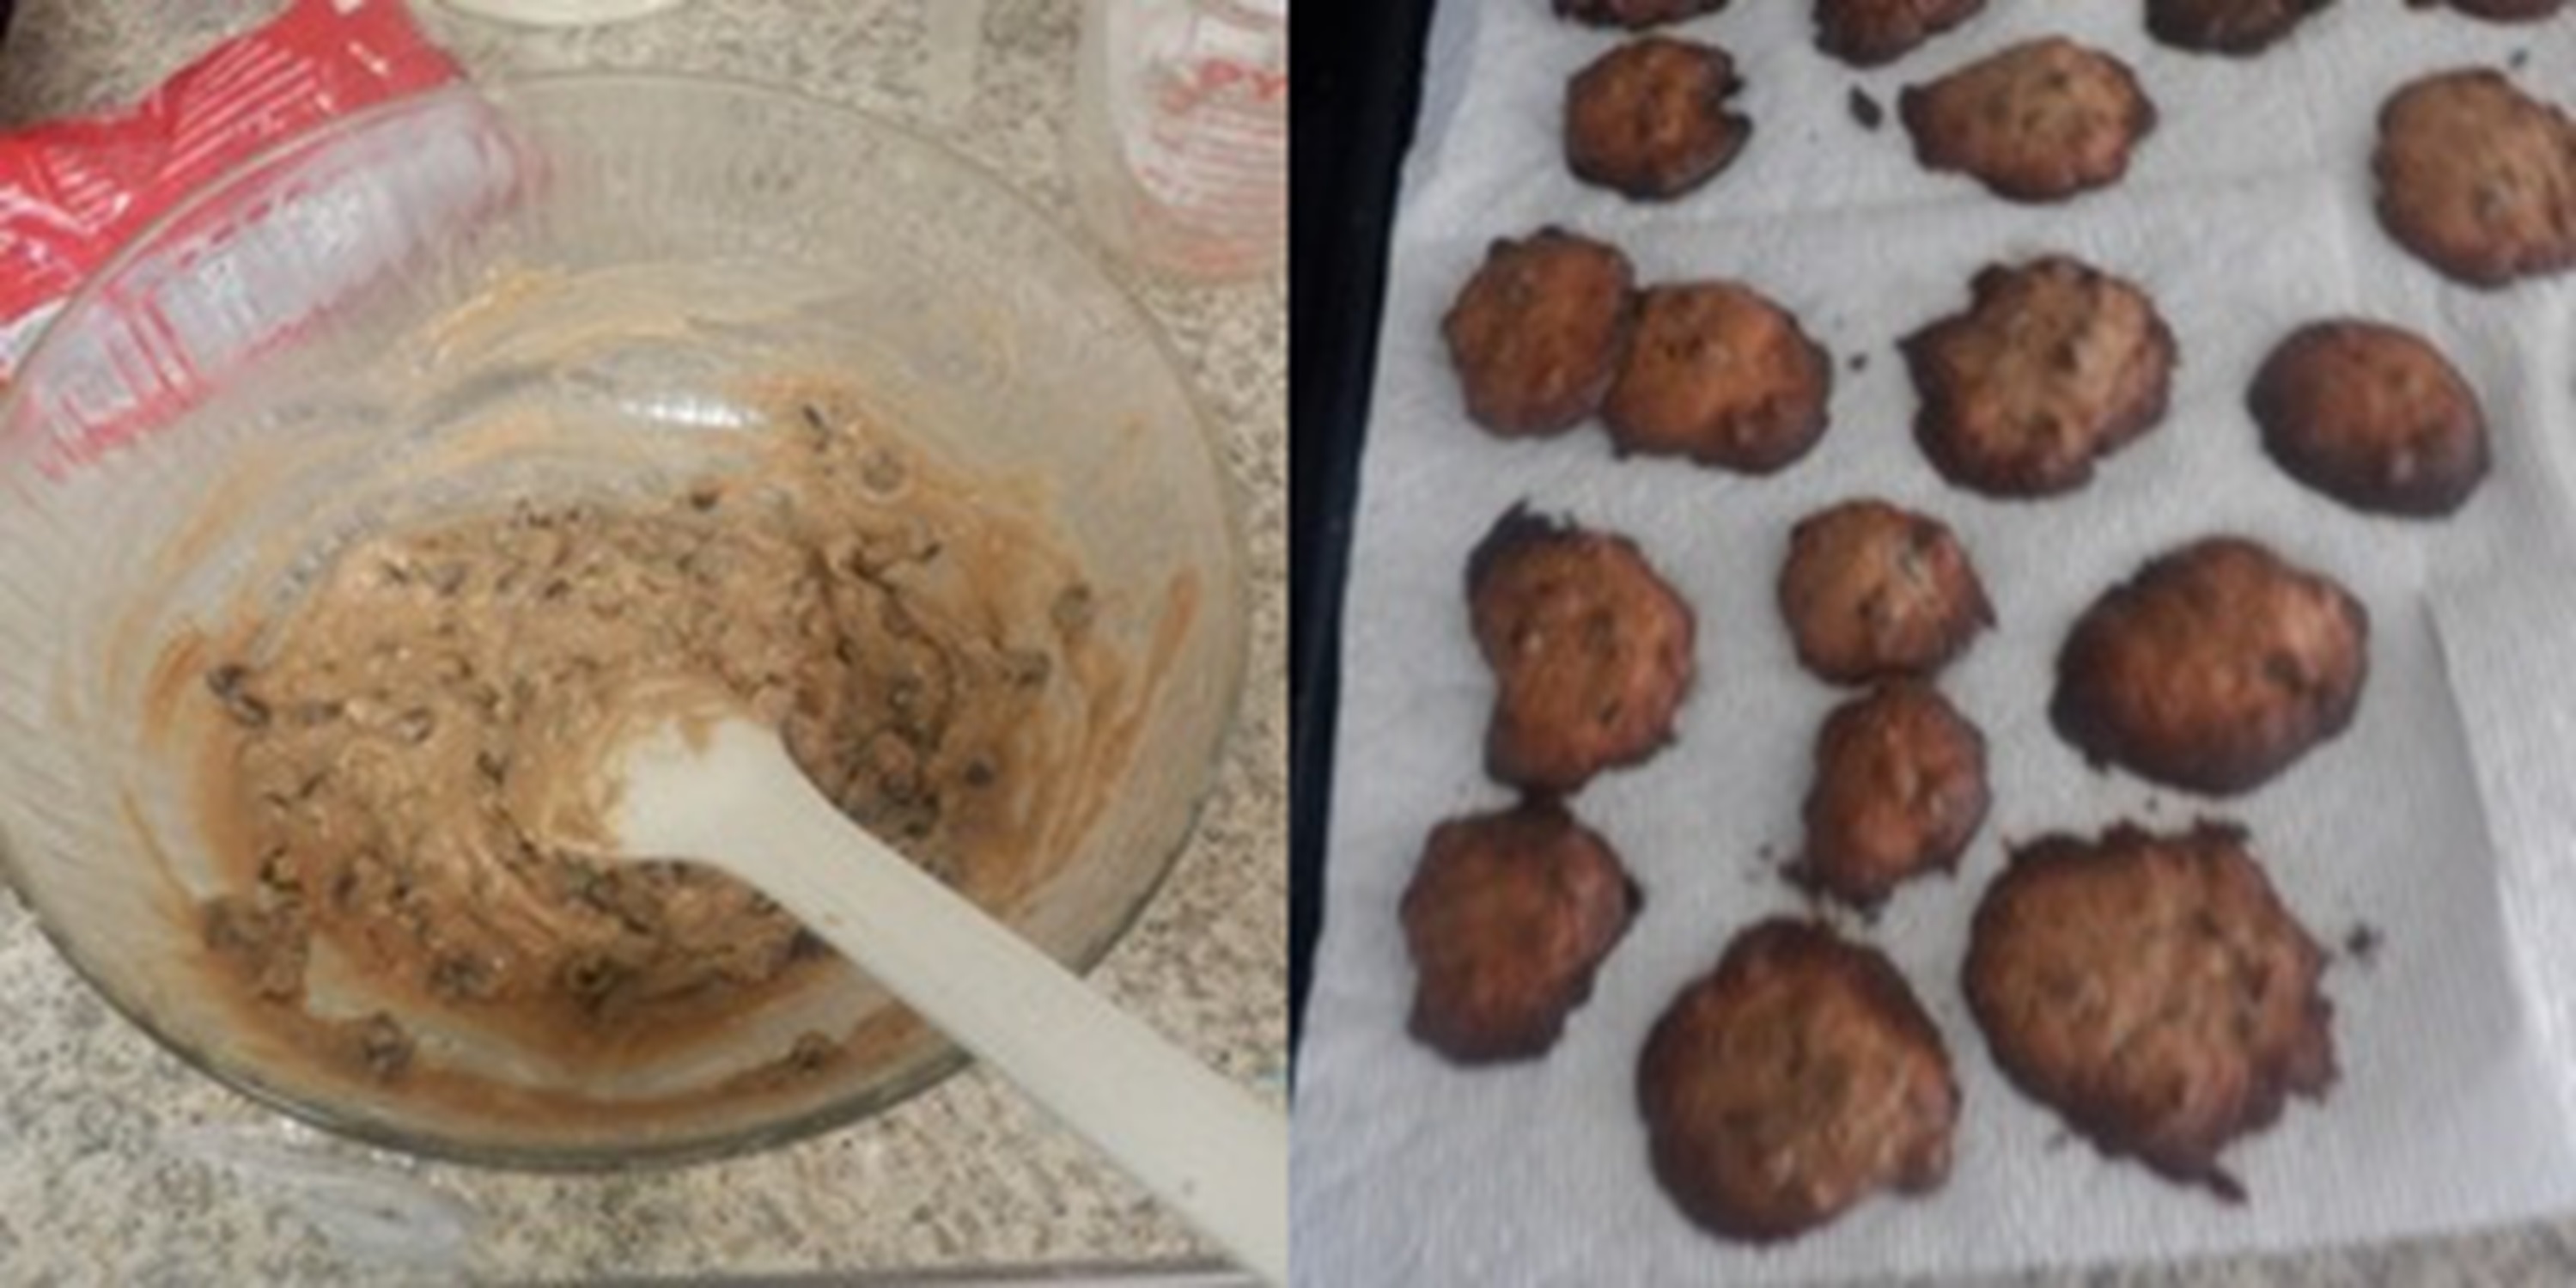 Photos I took of cookie making